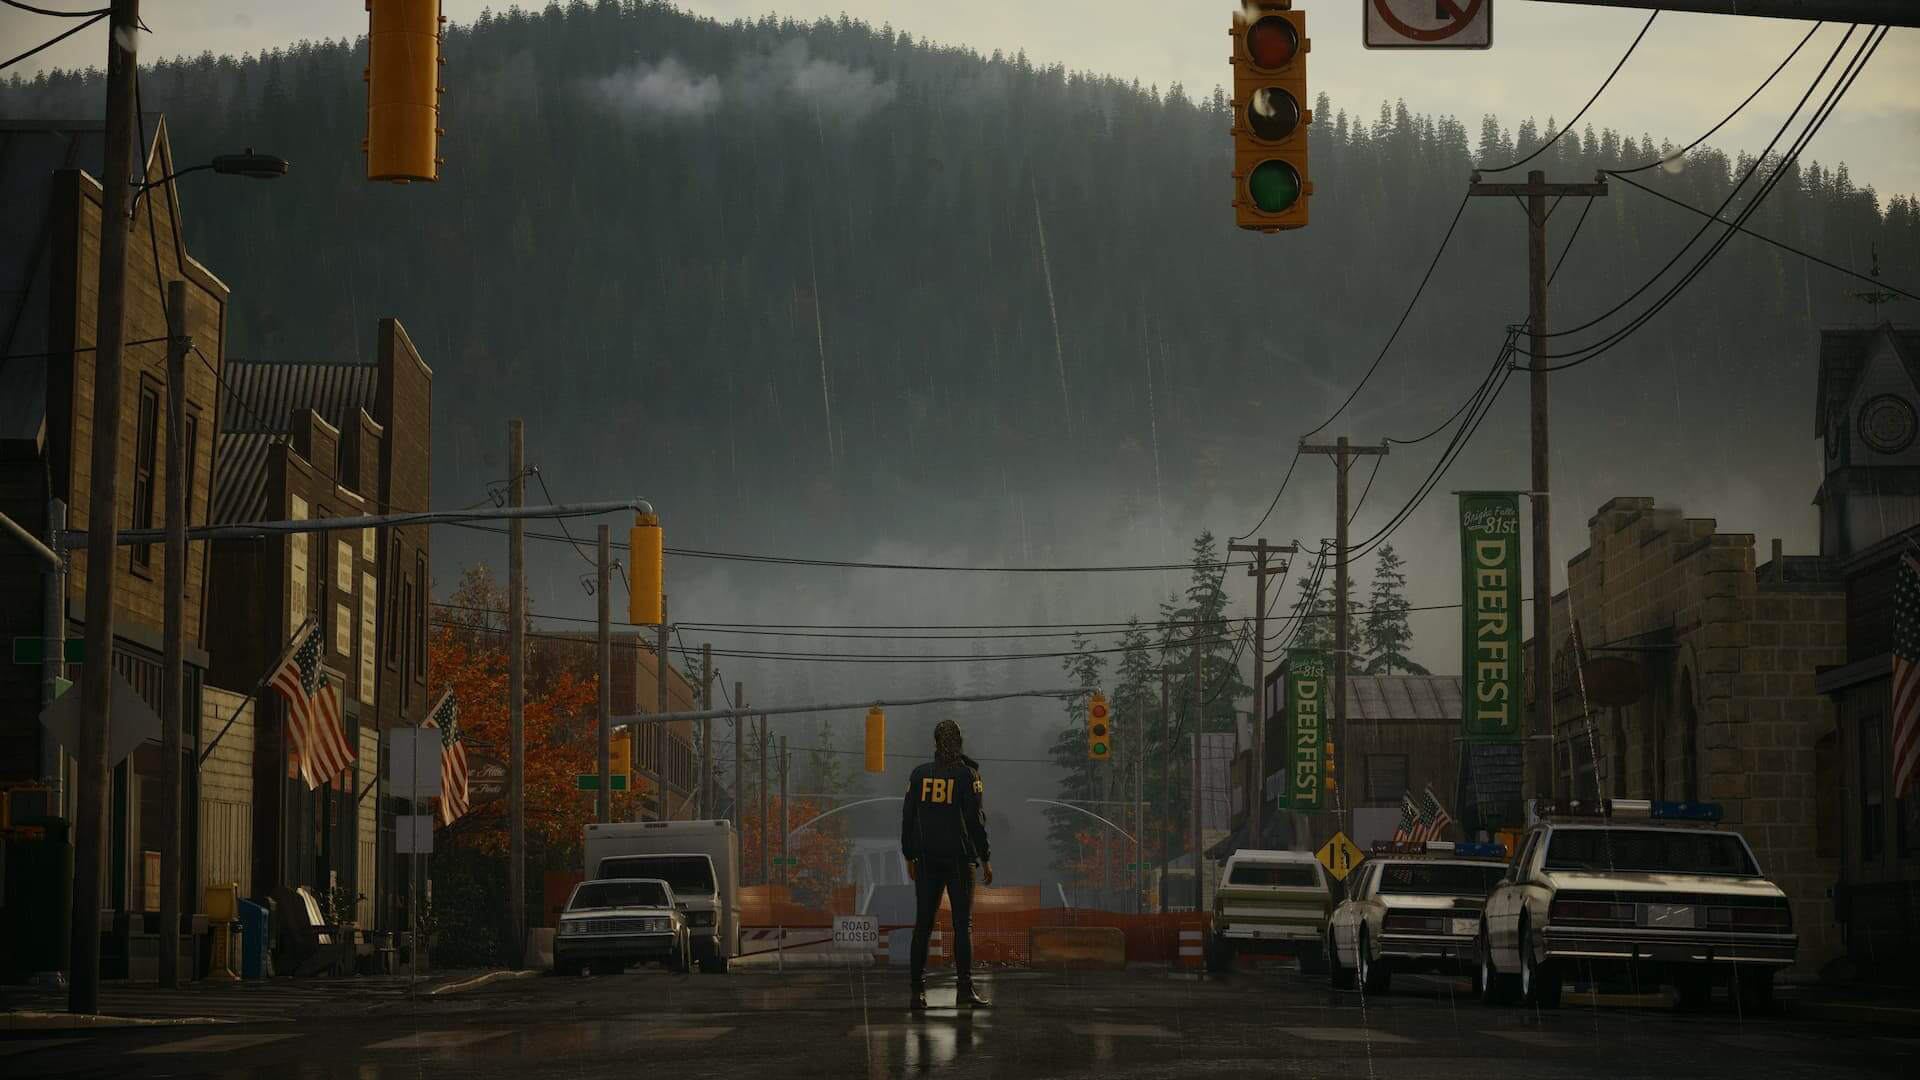 Alan Wake 2 Release Date Guide: When Does It Come Out?